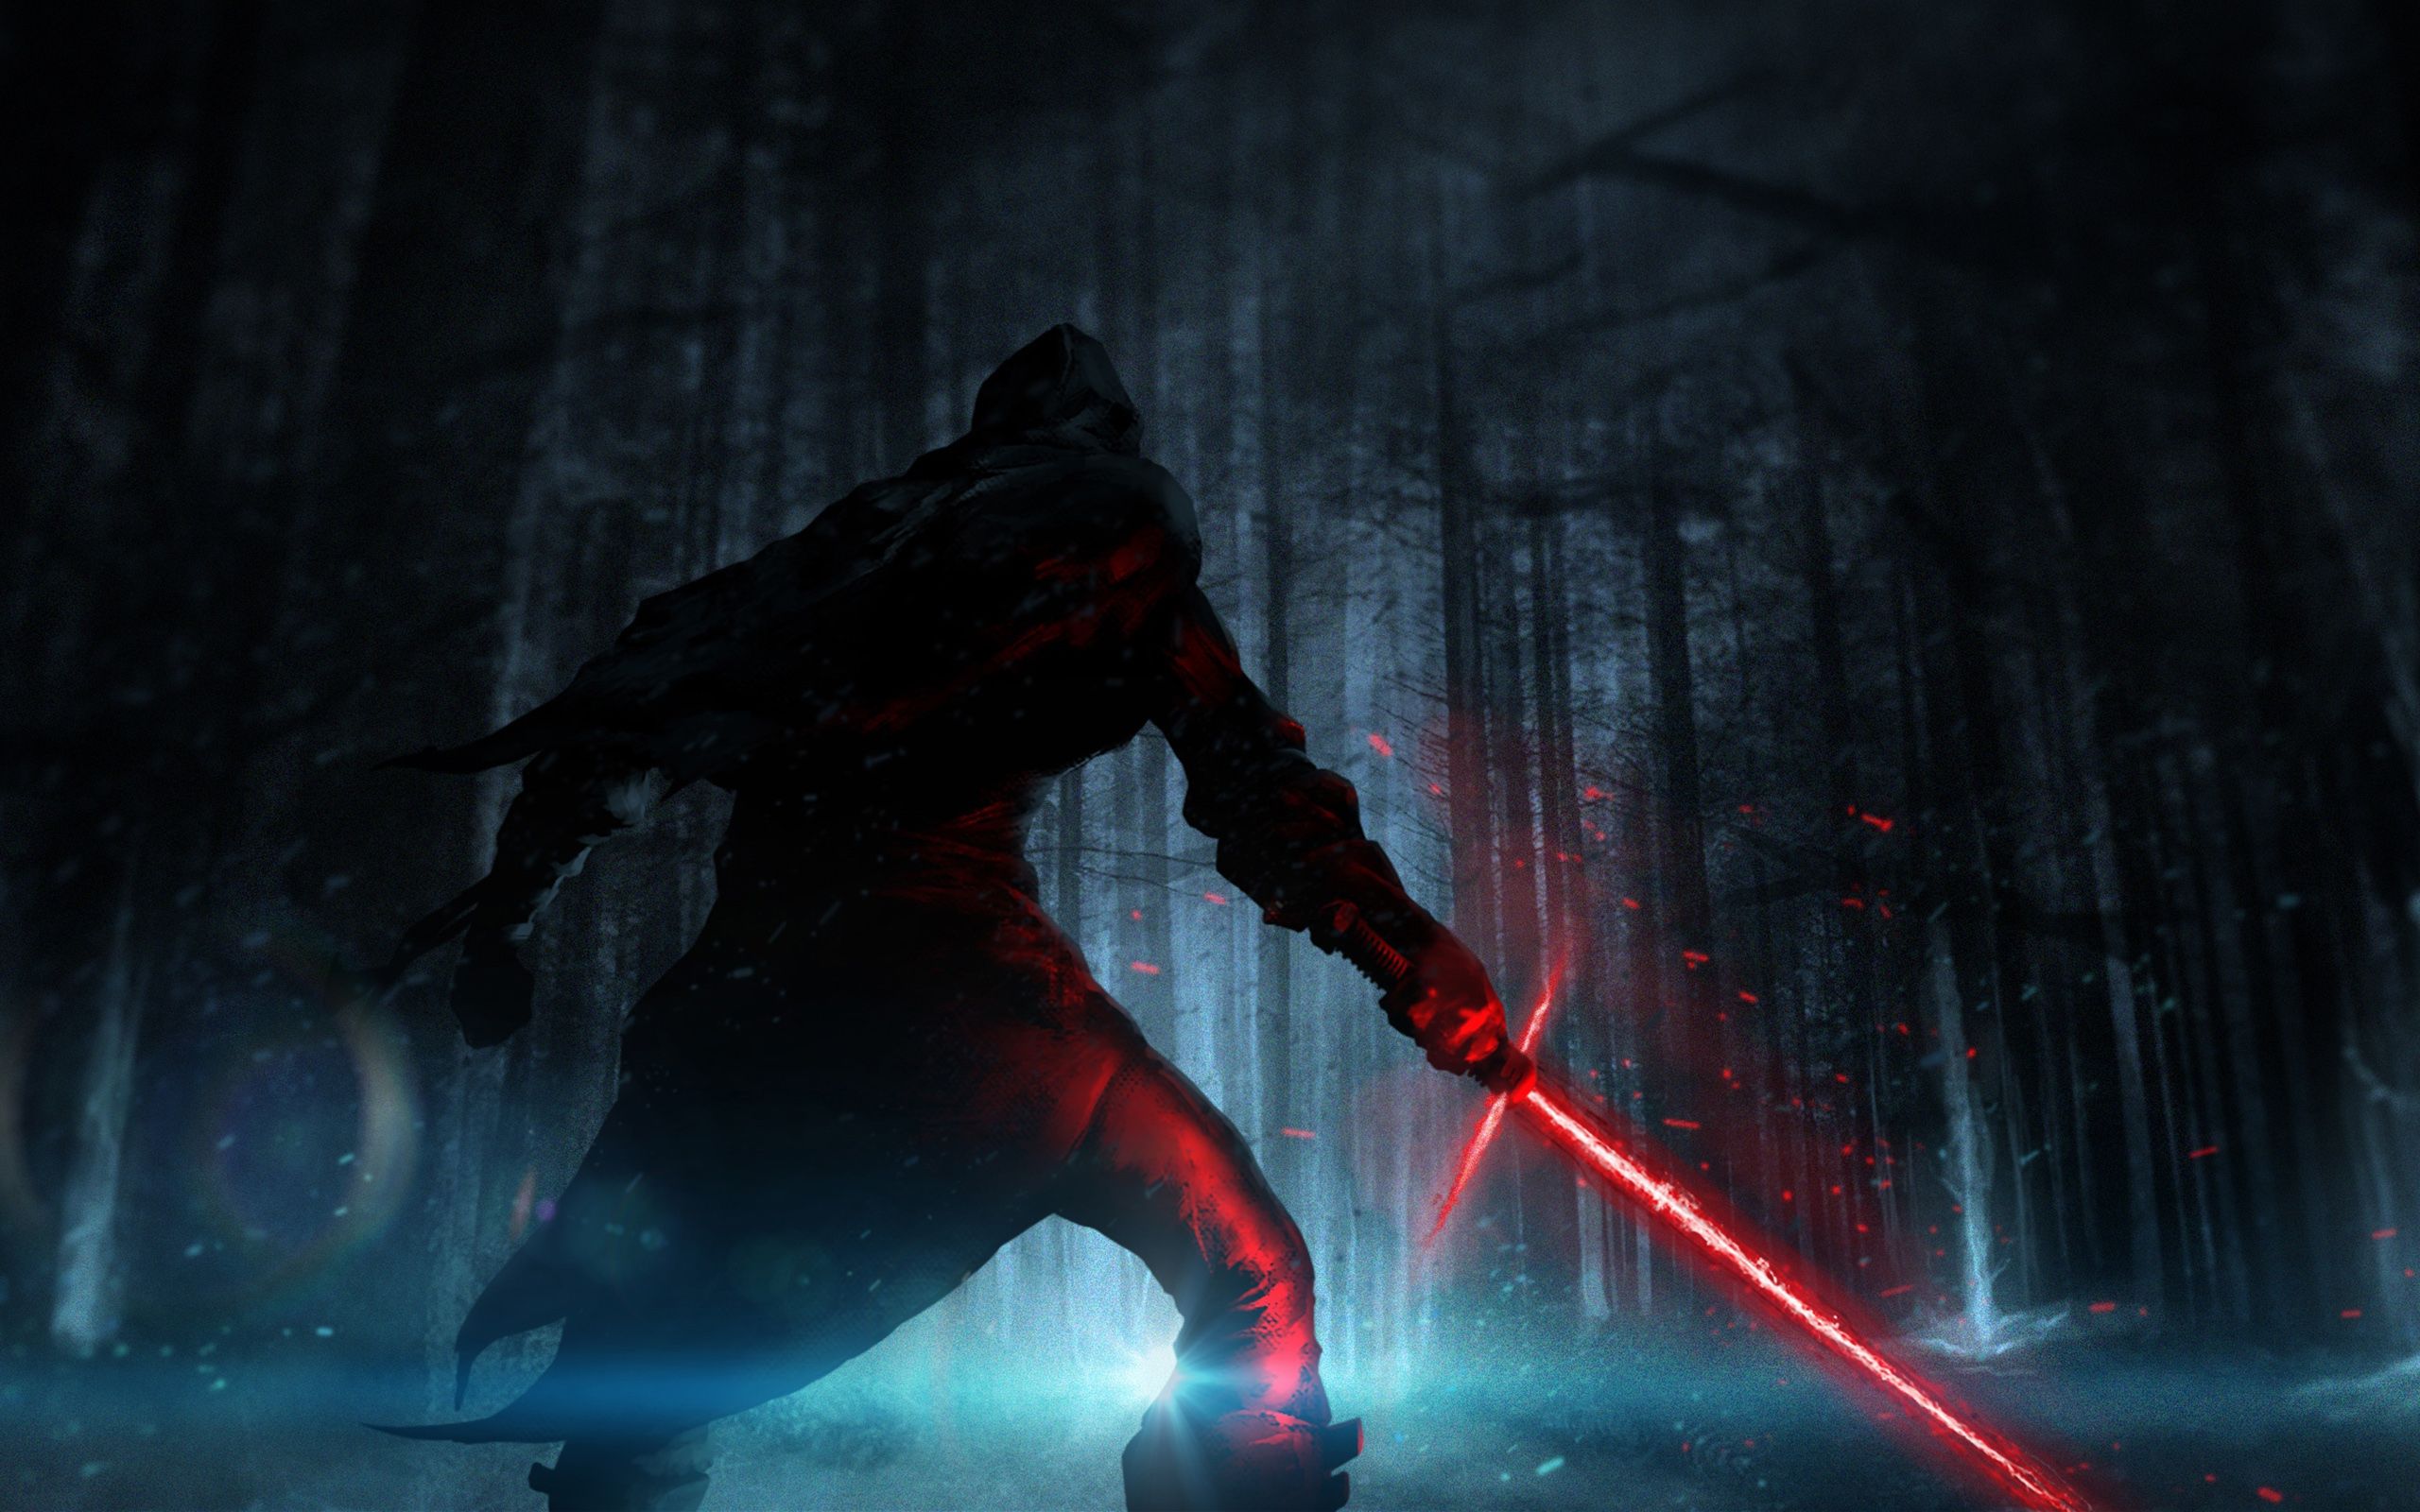 Star Wars Episode VII The Force Awakens Wallpapers | HD Wallpapers